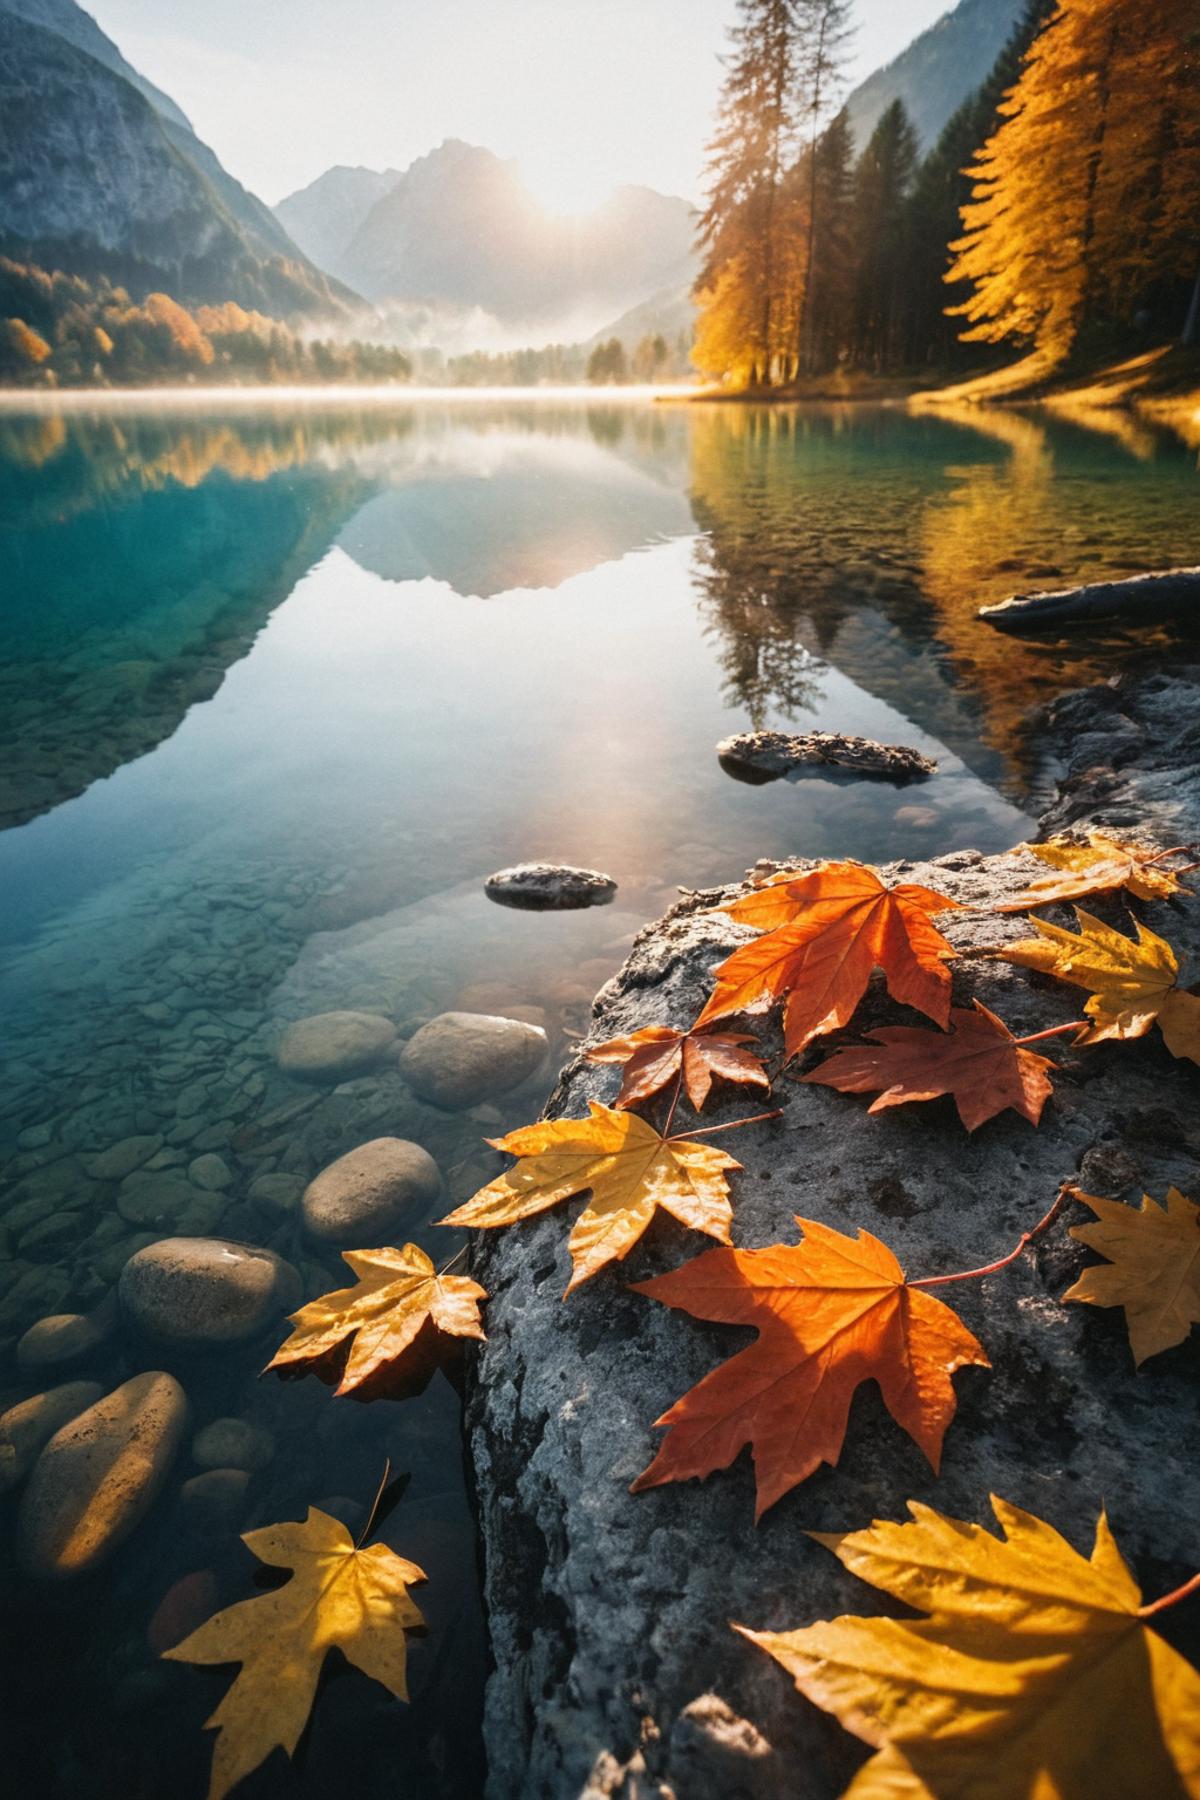 A serene scene of fallen leaves near a lake with a mountain in the background.